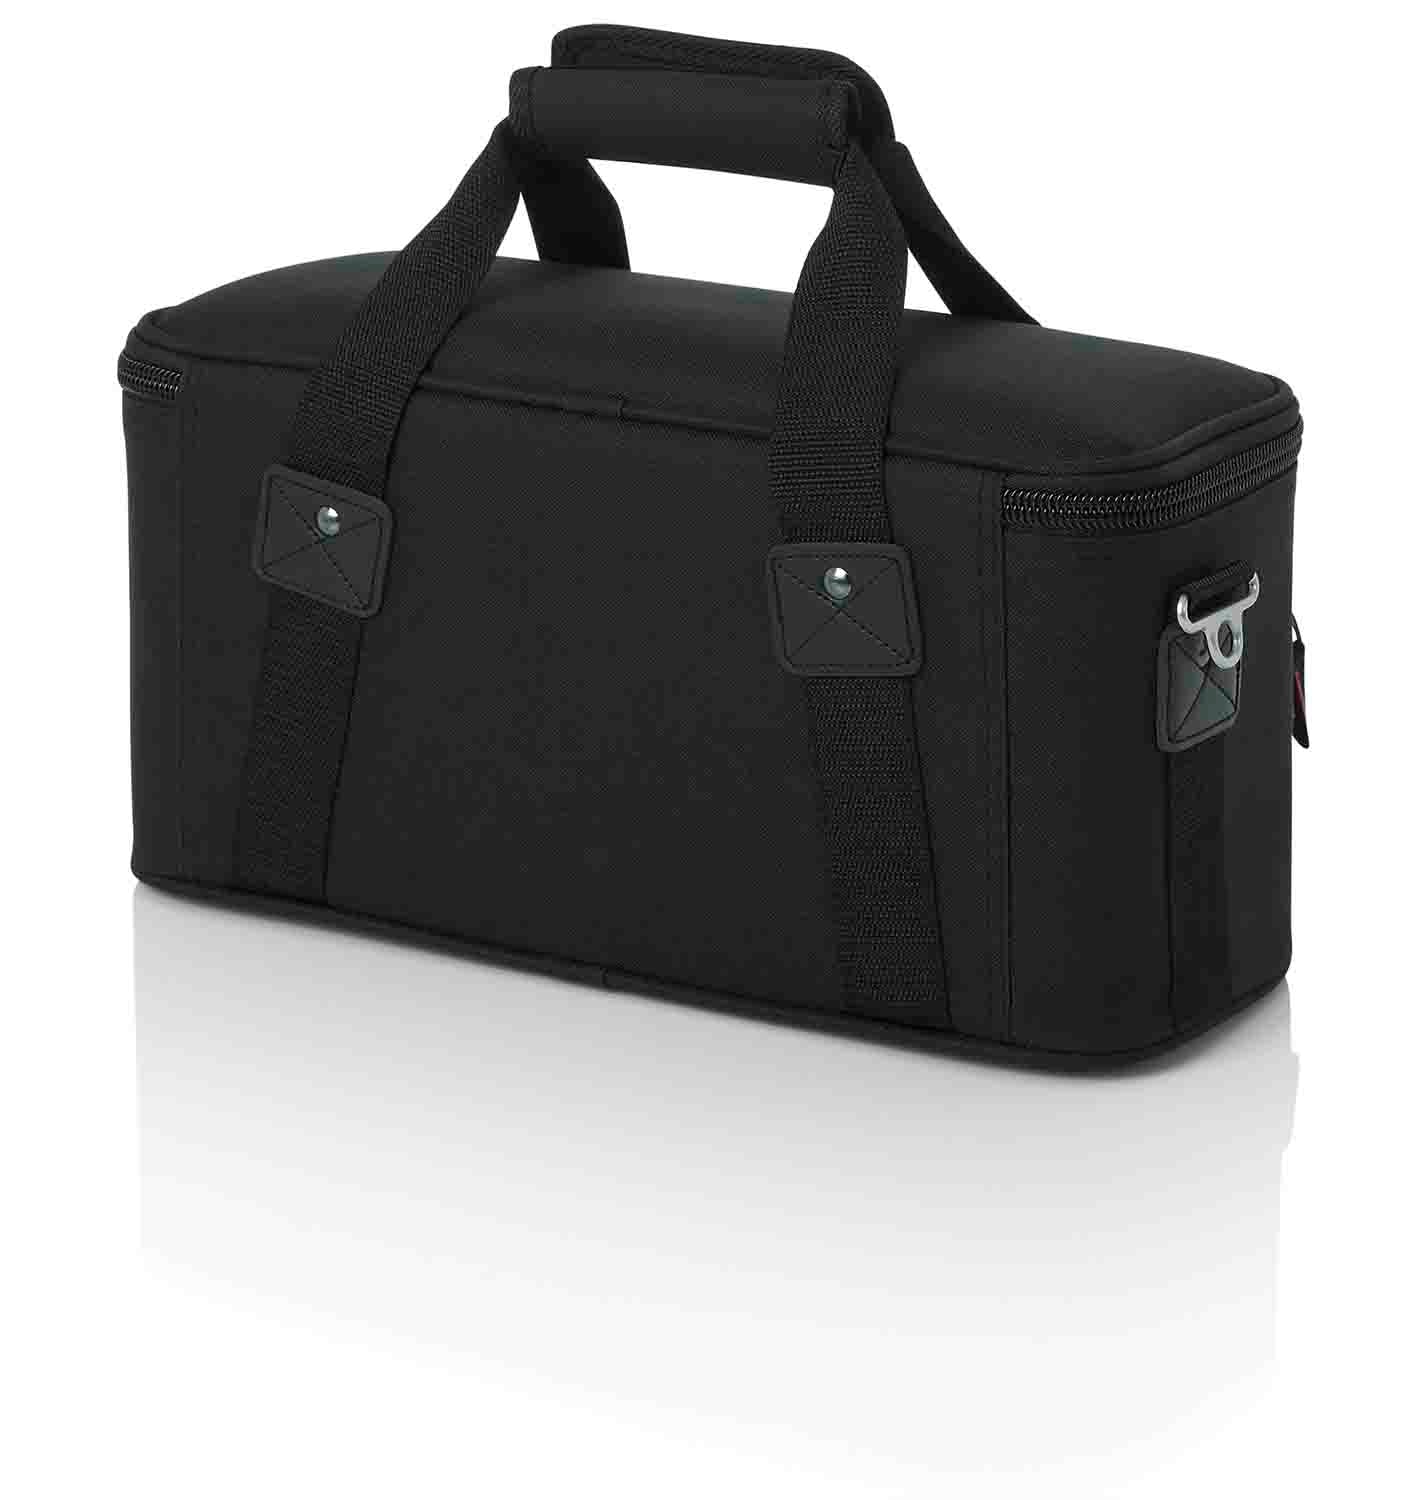 Gator Cases GM-12B DJ Bag for 12 Microphones with Exterior Pockets for Cables - Hollywood DJ